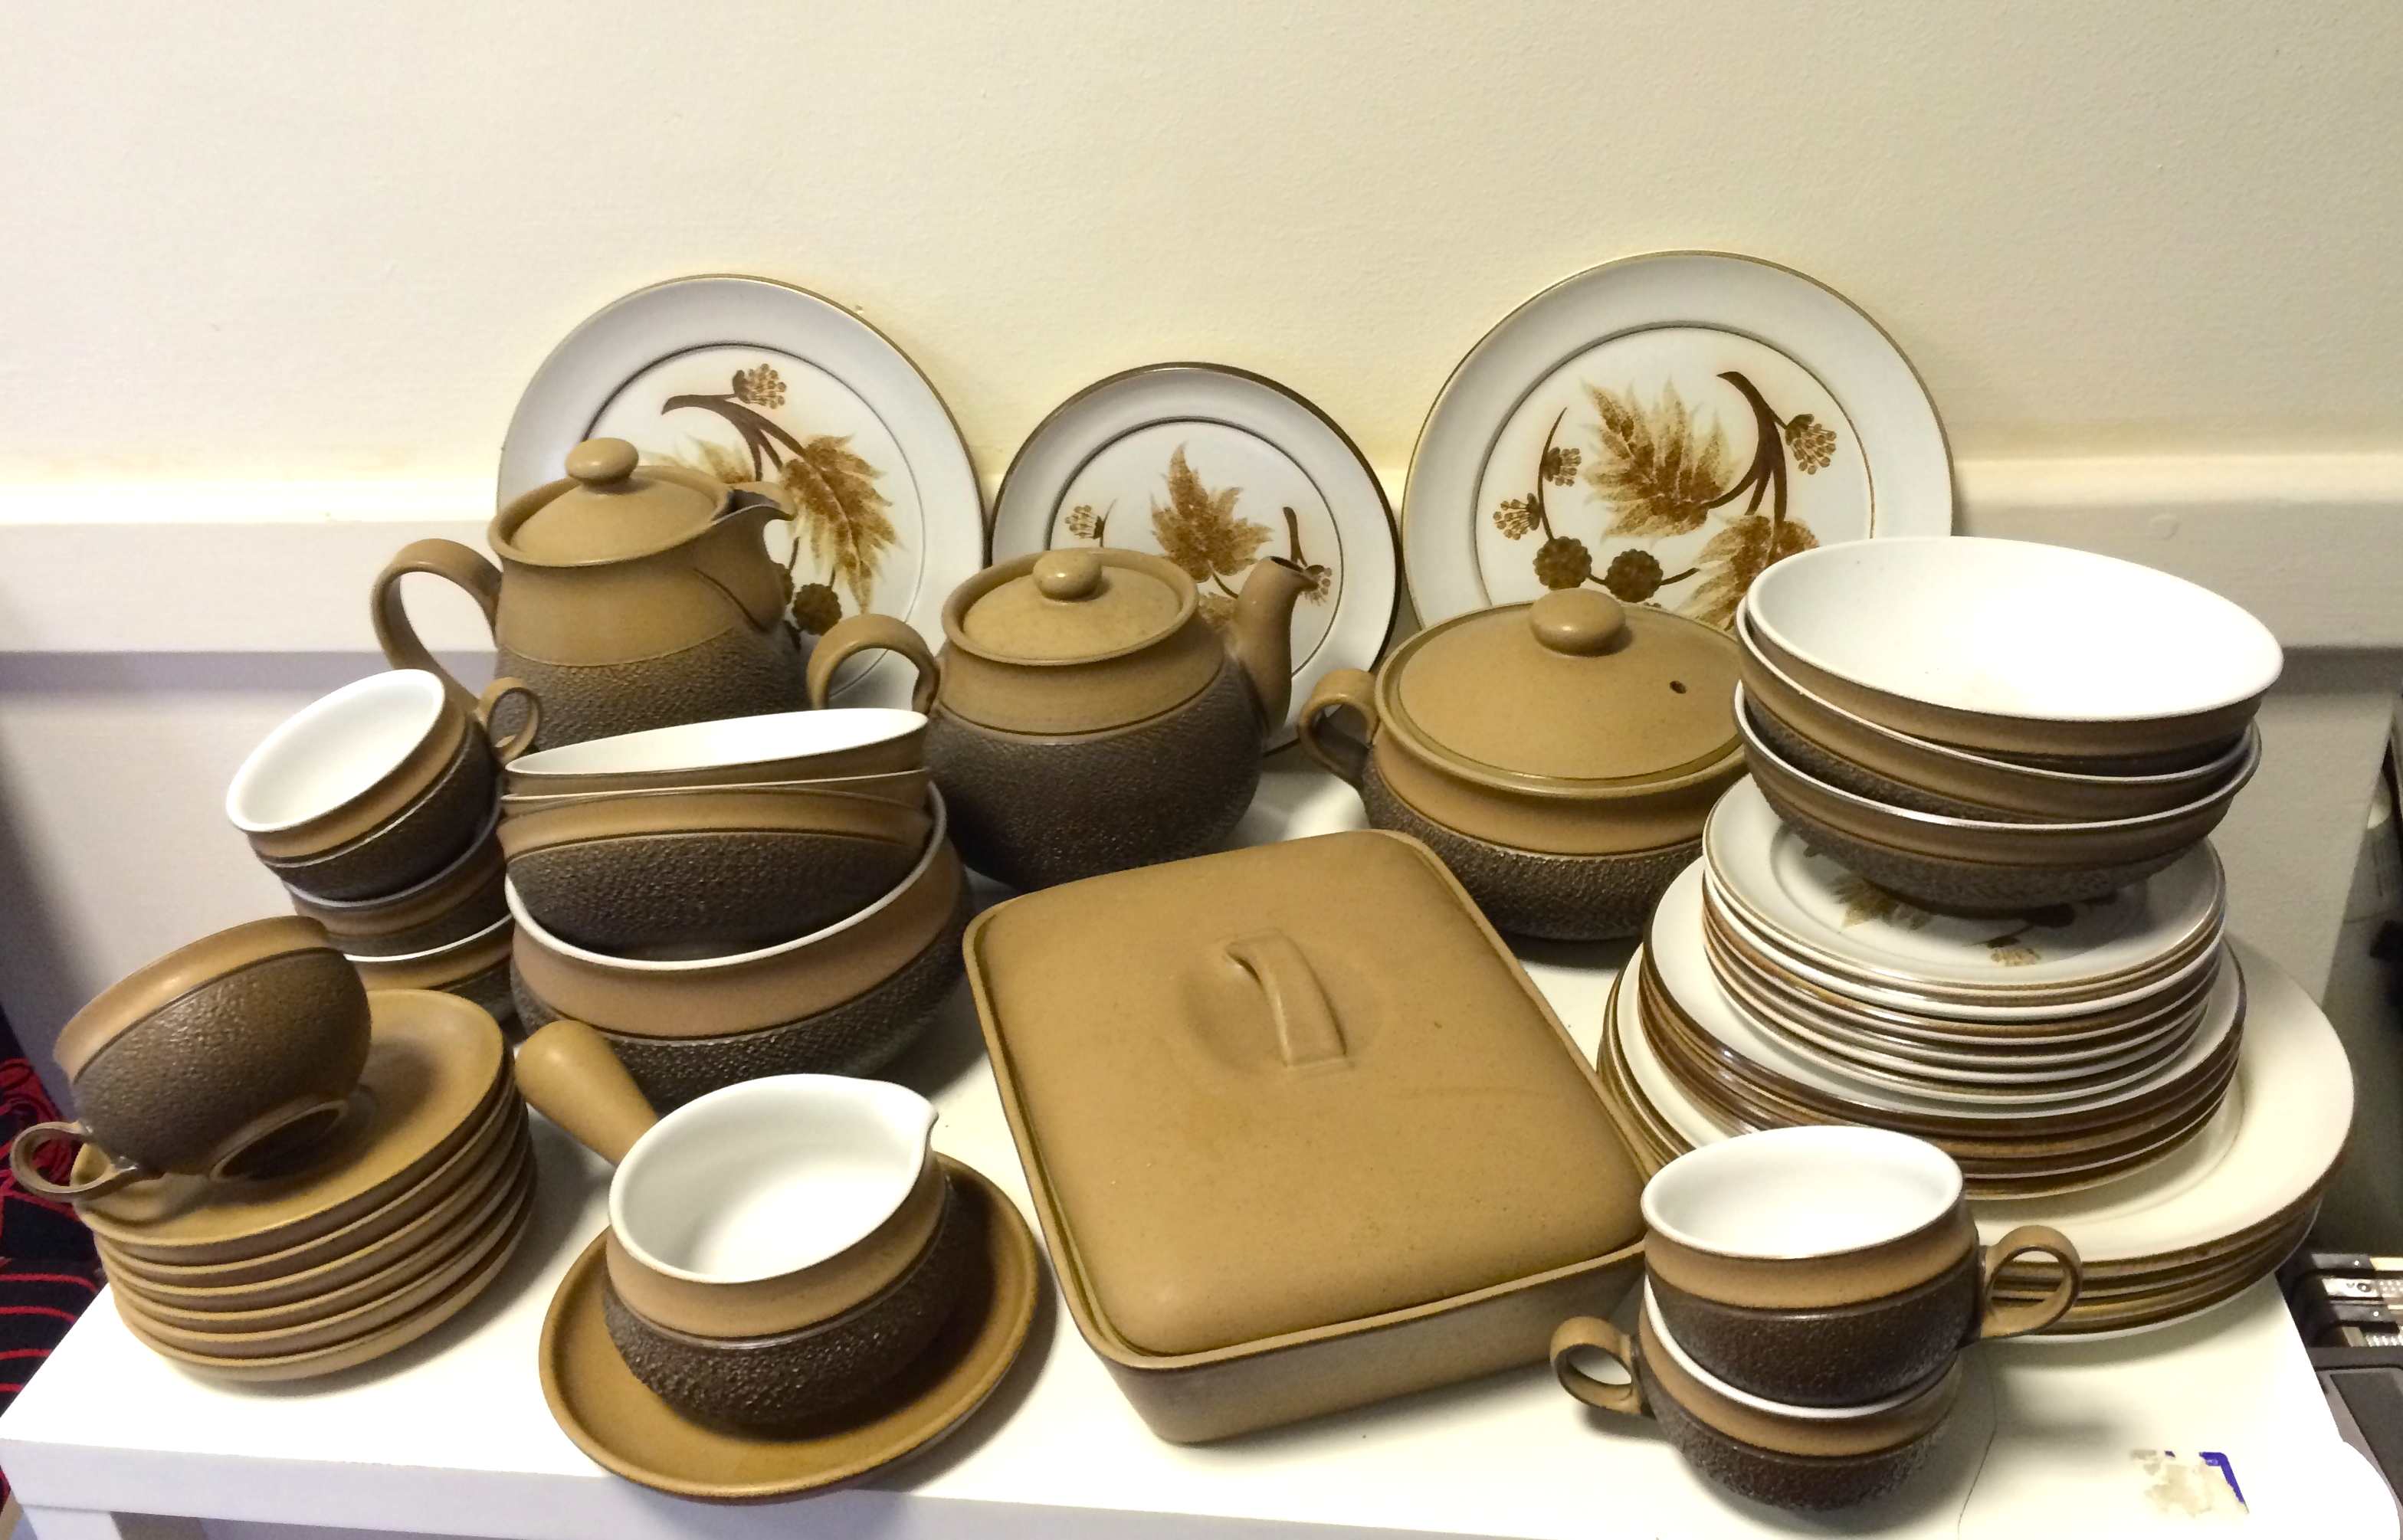 Large collection of Denby table ware.